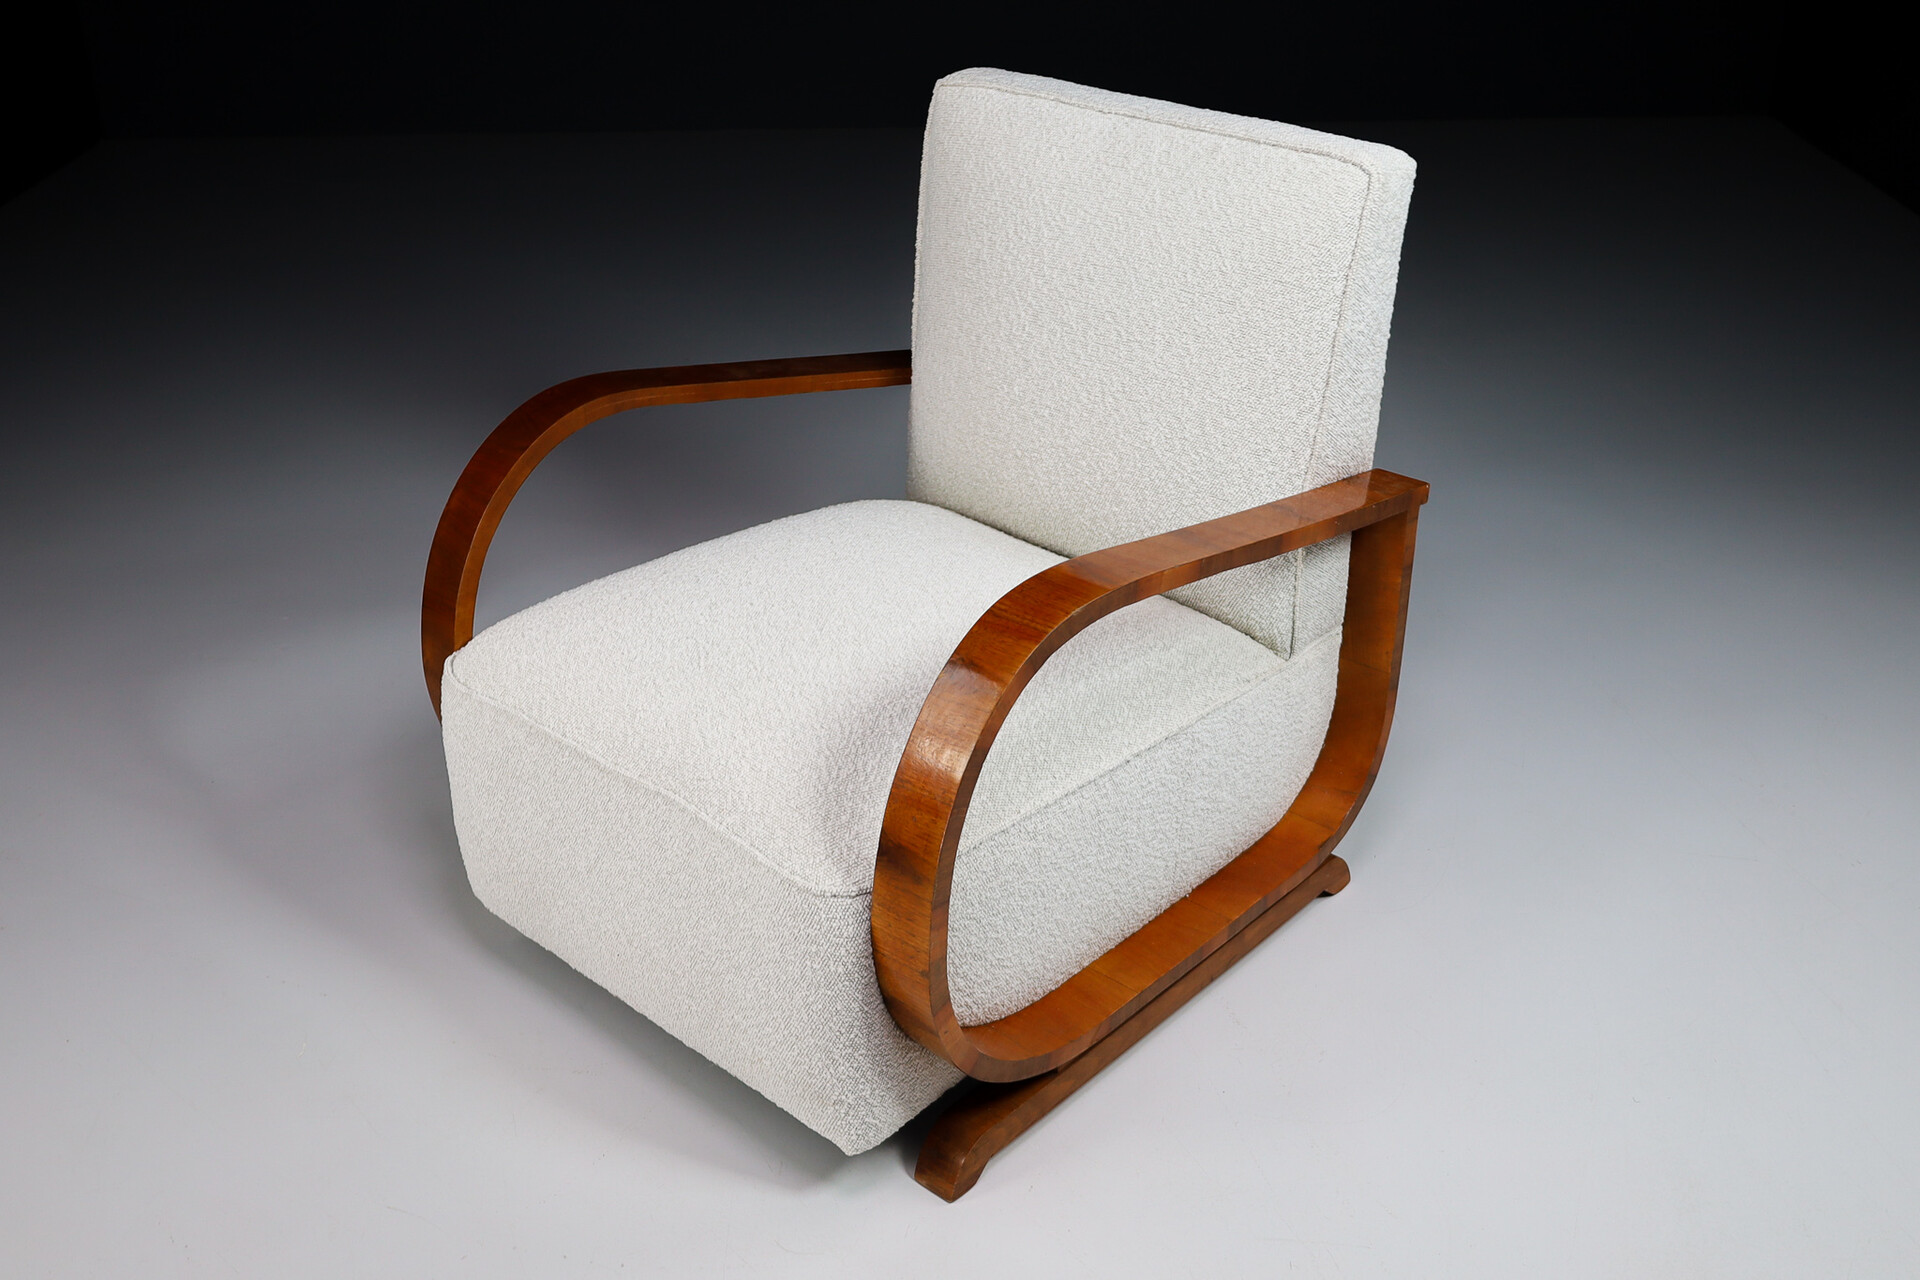 Mid century modern Art-Deco Arm Chairs / lounge chairs  With New Upholstered Bouclé Fabric, Italy 1930s Early-20th century